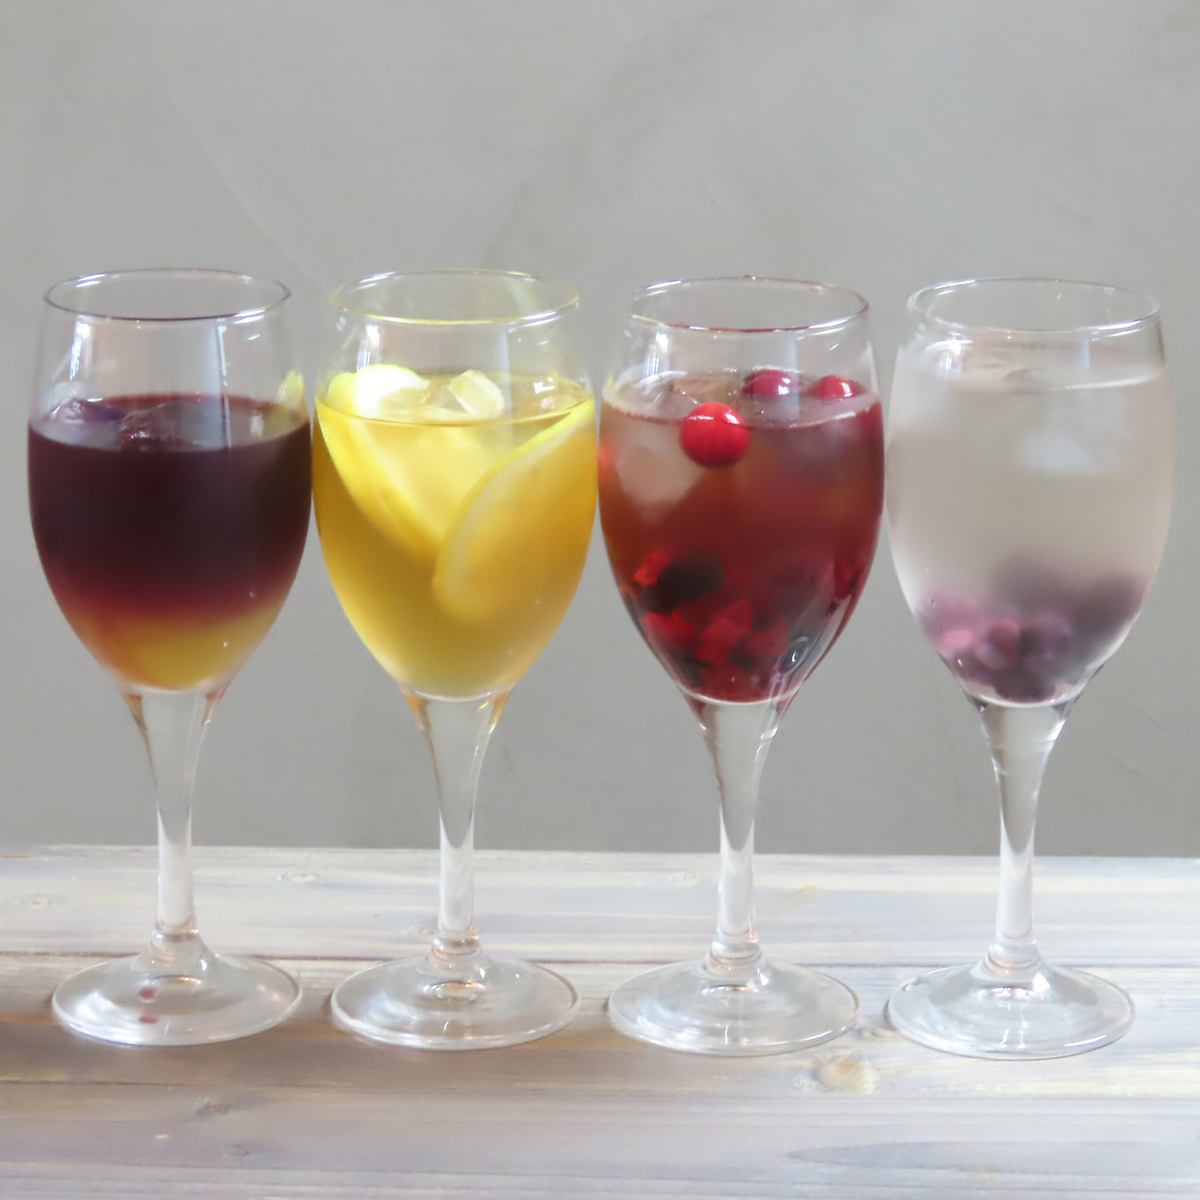 We have a variety of sangria and cocktails♪